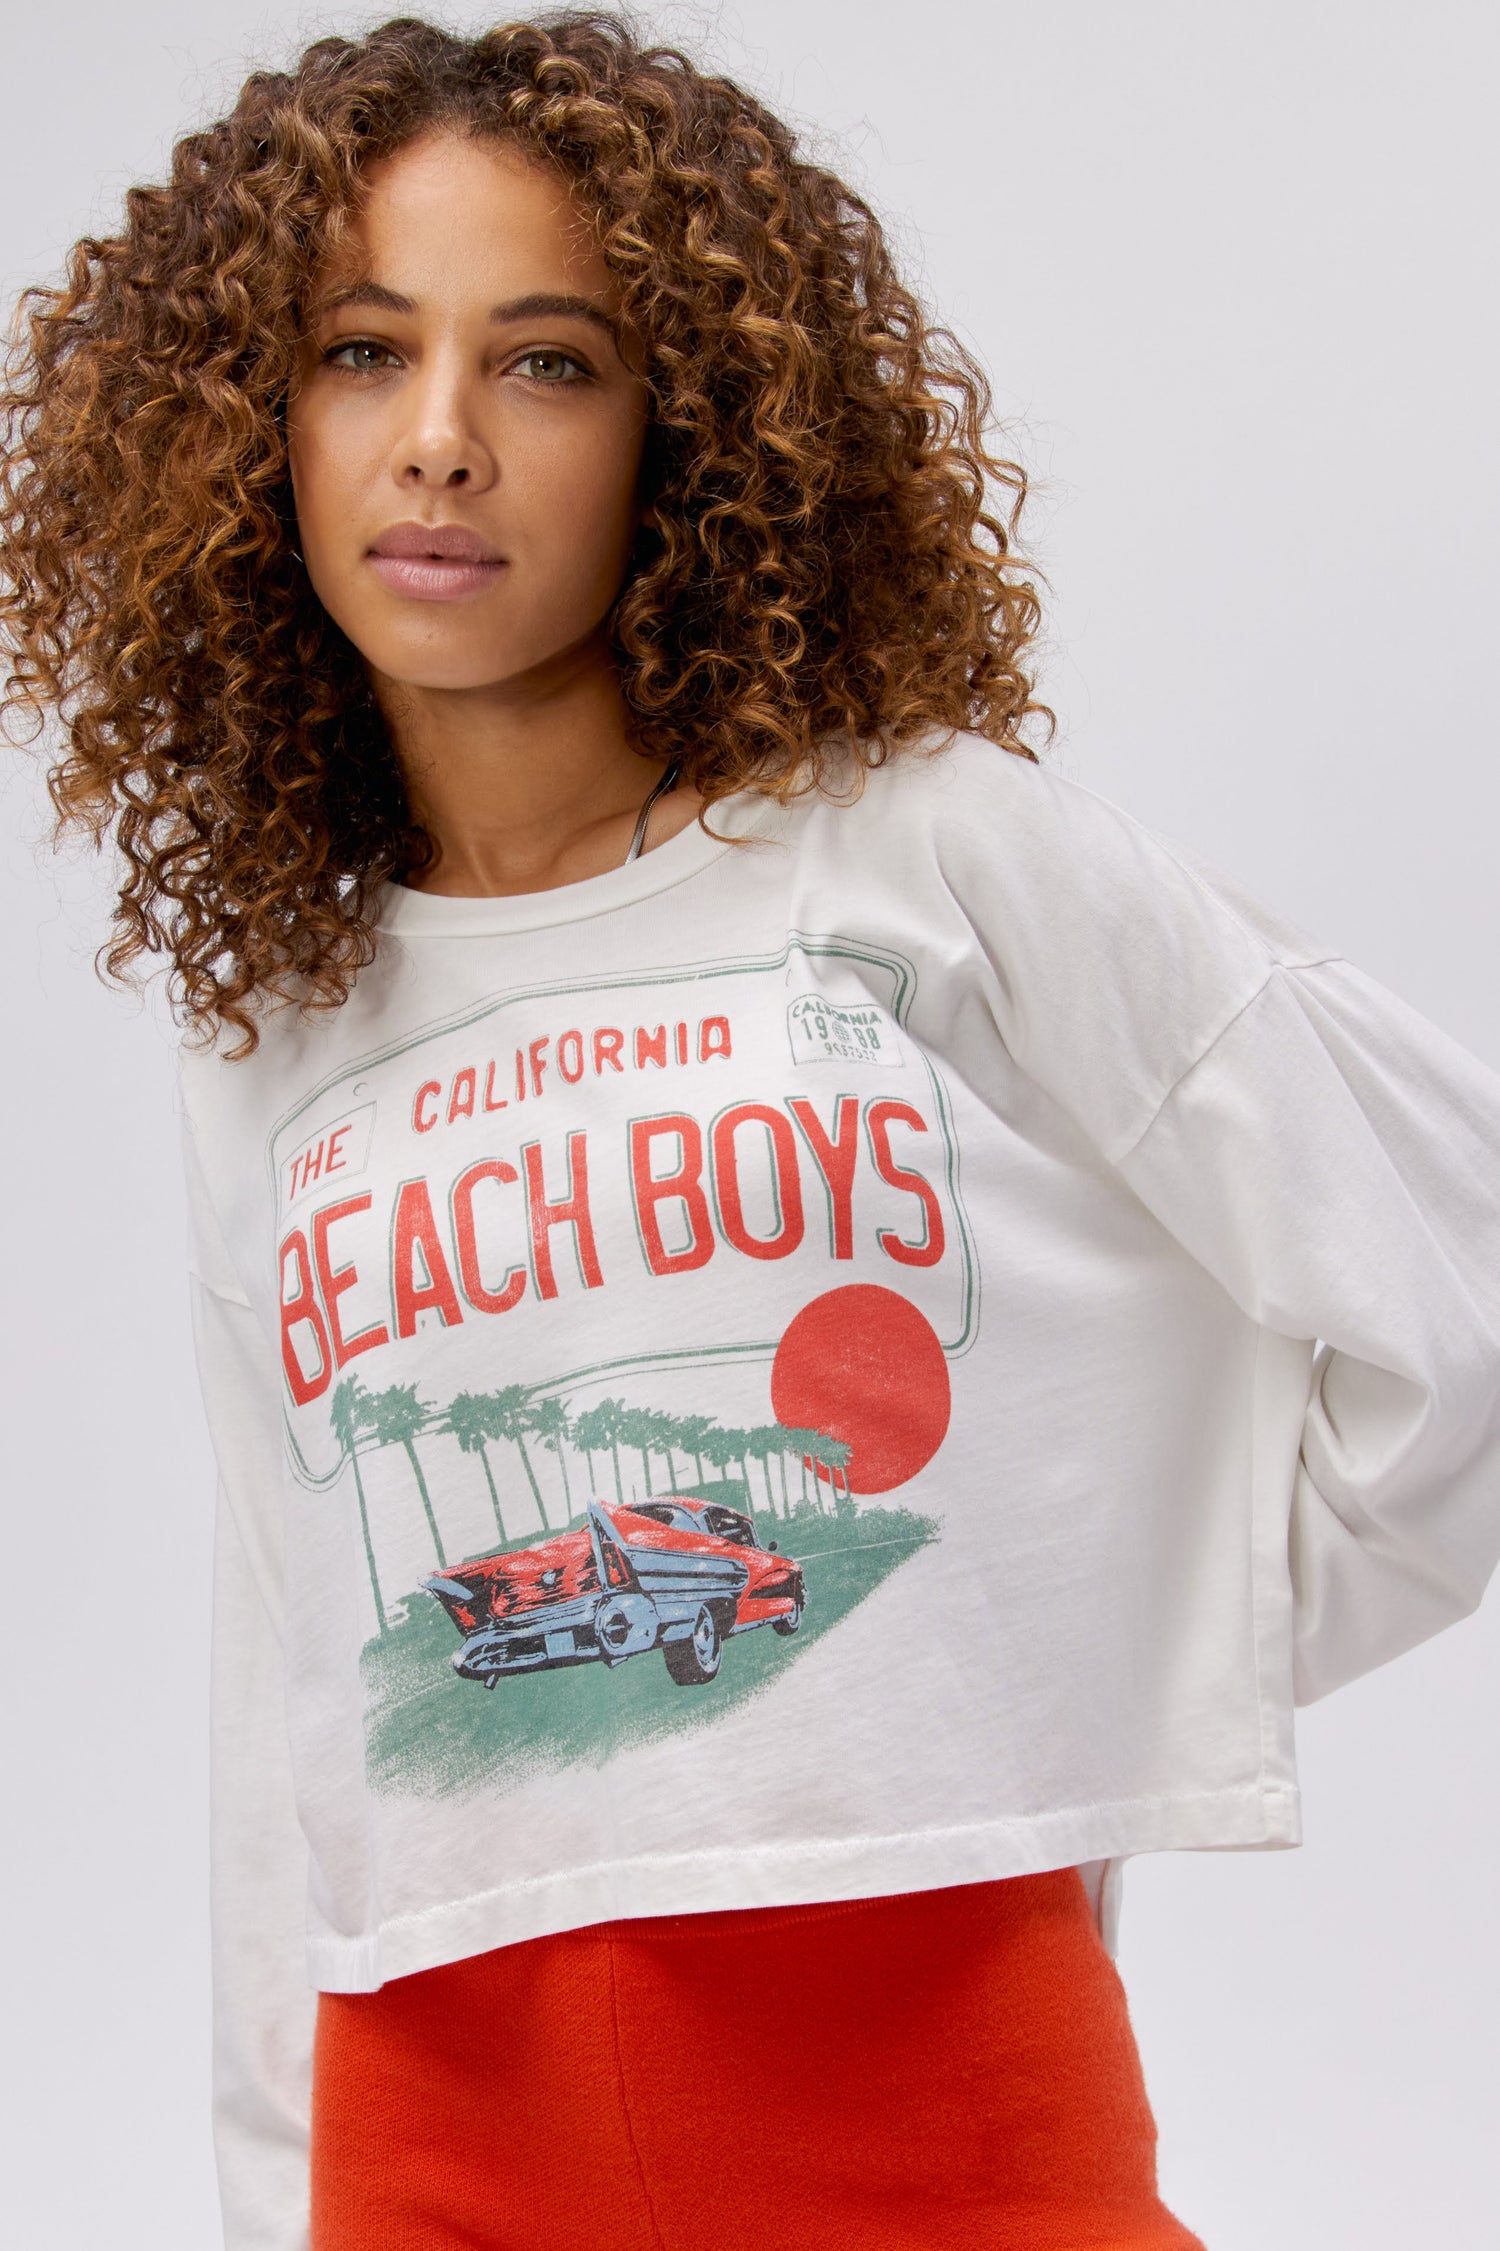 A curly-haired model featuring a white long sleeve stamped with "The Californa Beach Boys" and is desiged with a graphic of trees and cars on the center.